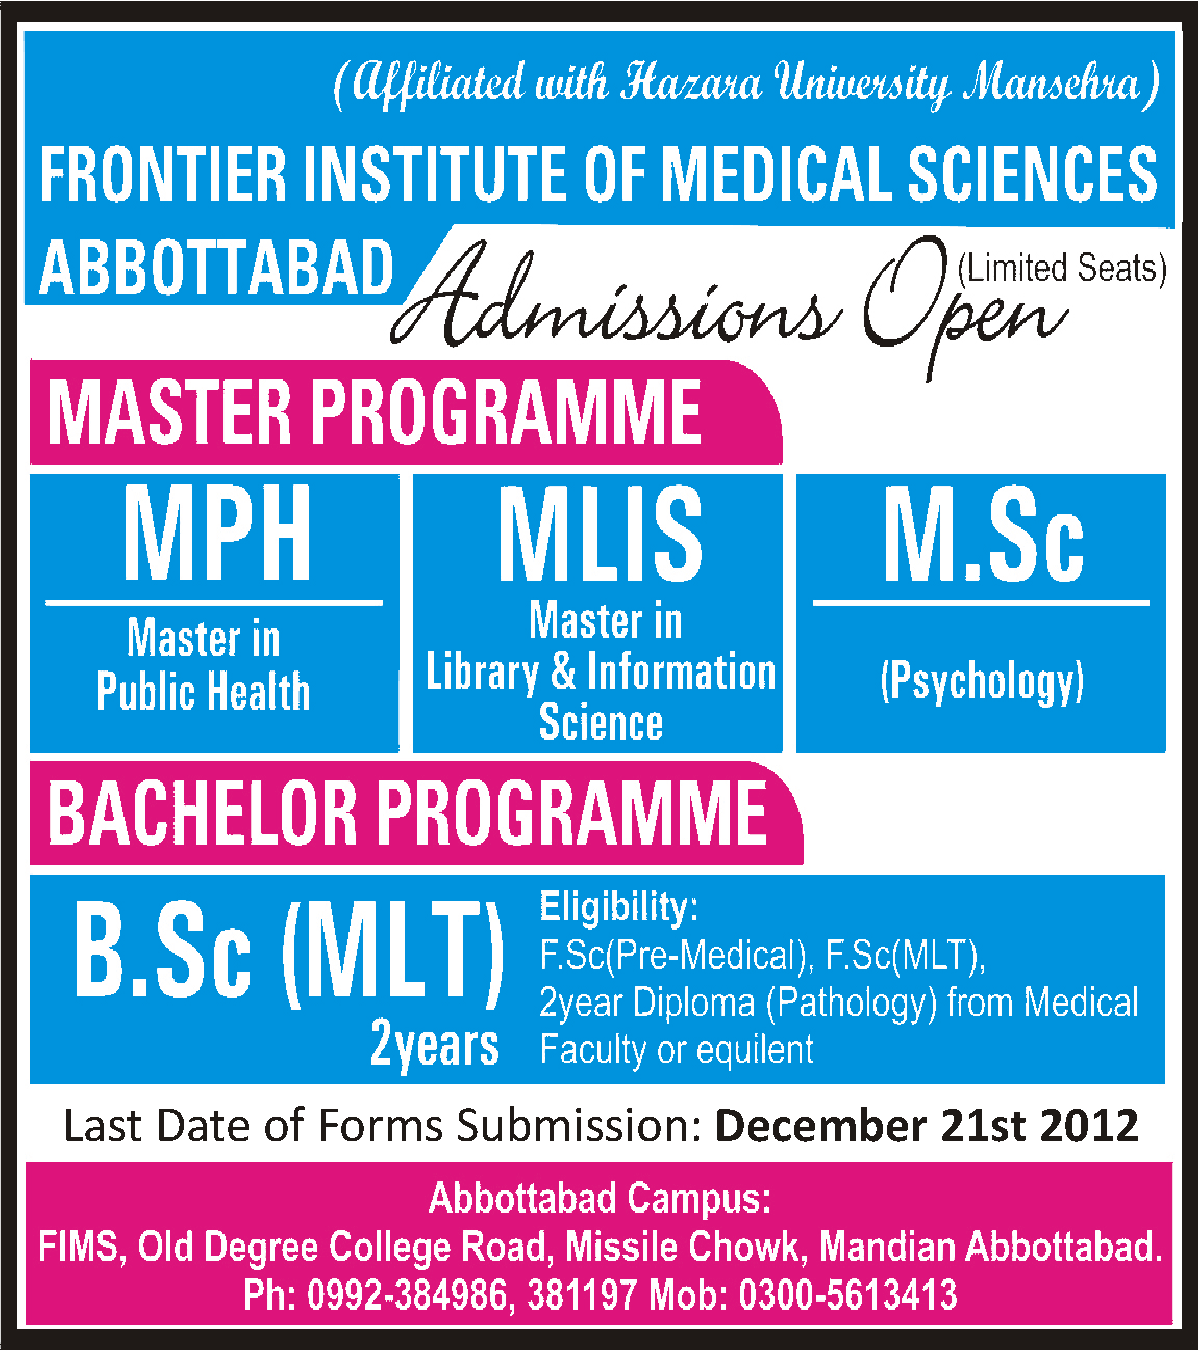 Abbottabad: Frontier Institute of Medical Sciences (FIMS() Abbottabad Admission Notice 2013 for M.Sc. Medical Laboratory Technology (MLT) , B.Sc. Medical Laboratory Technology (MLT) , Master of Public Health (MPH) and M.Sc. Psychology